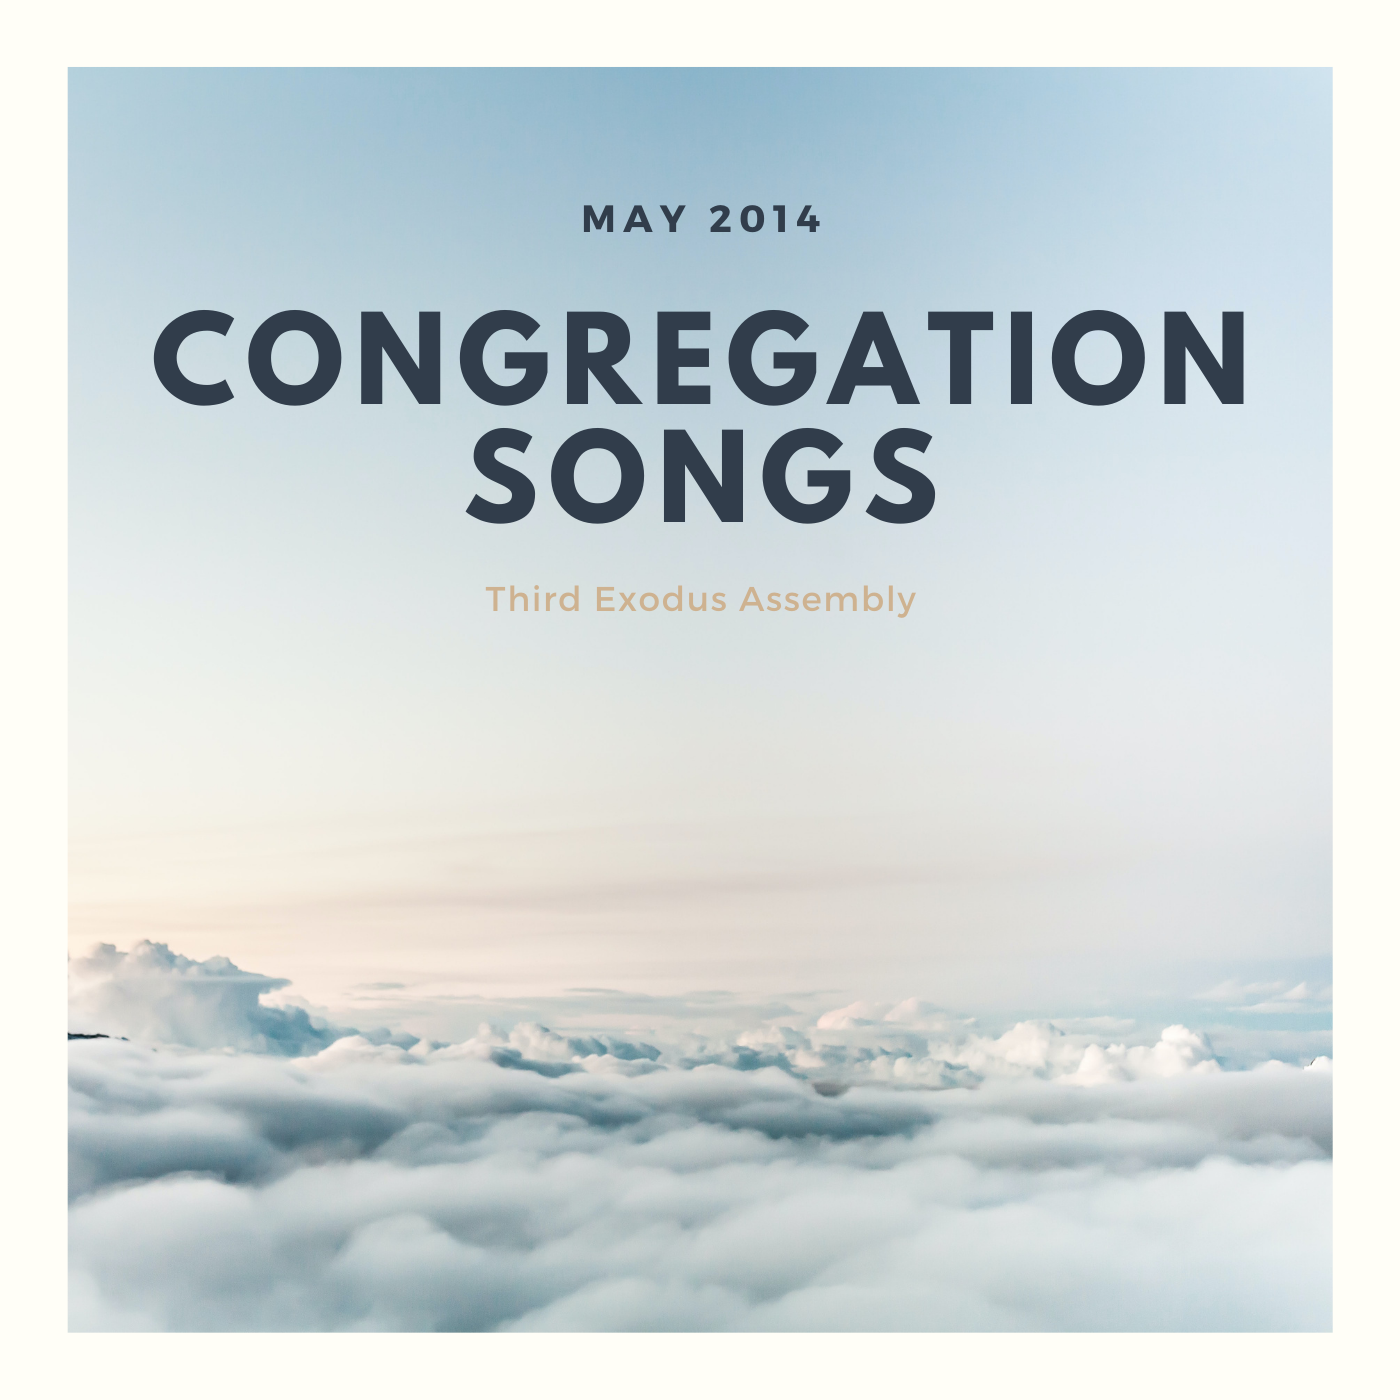 Congregation Songs [May 2014]